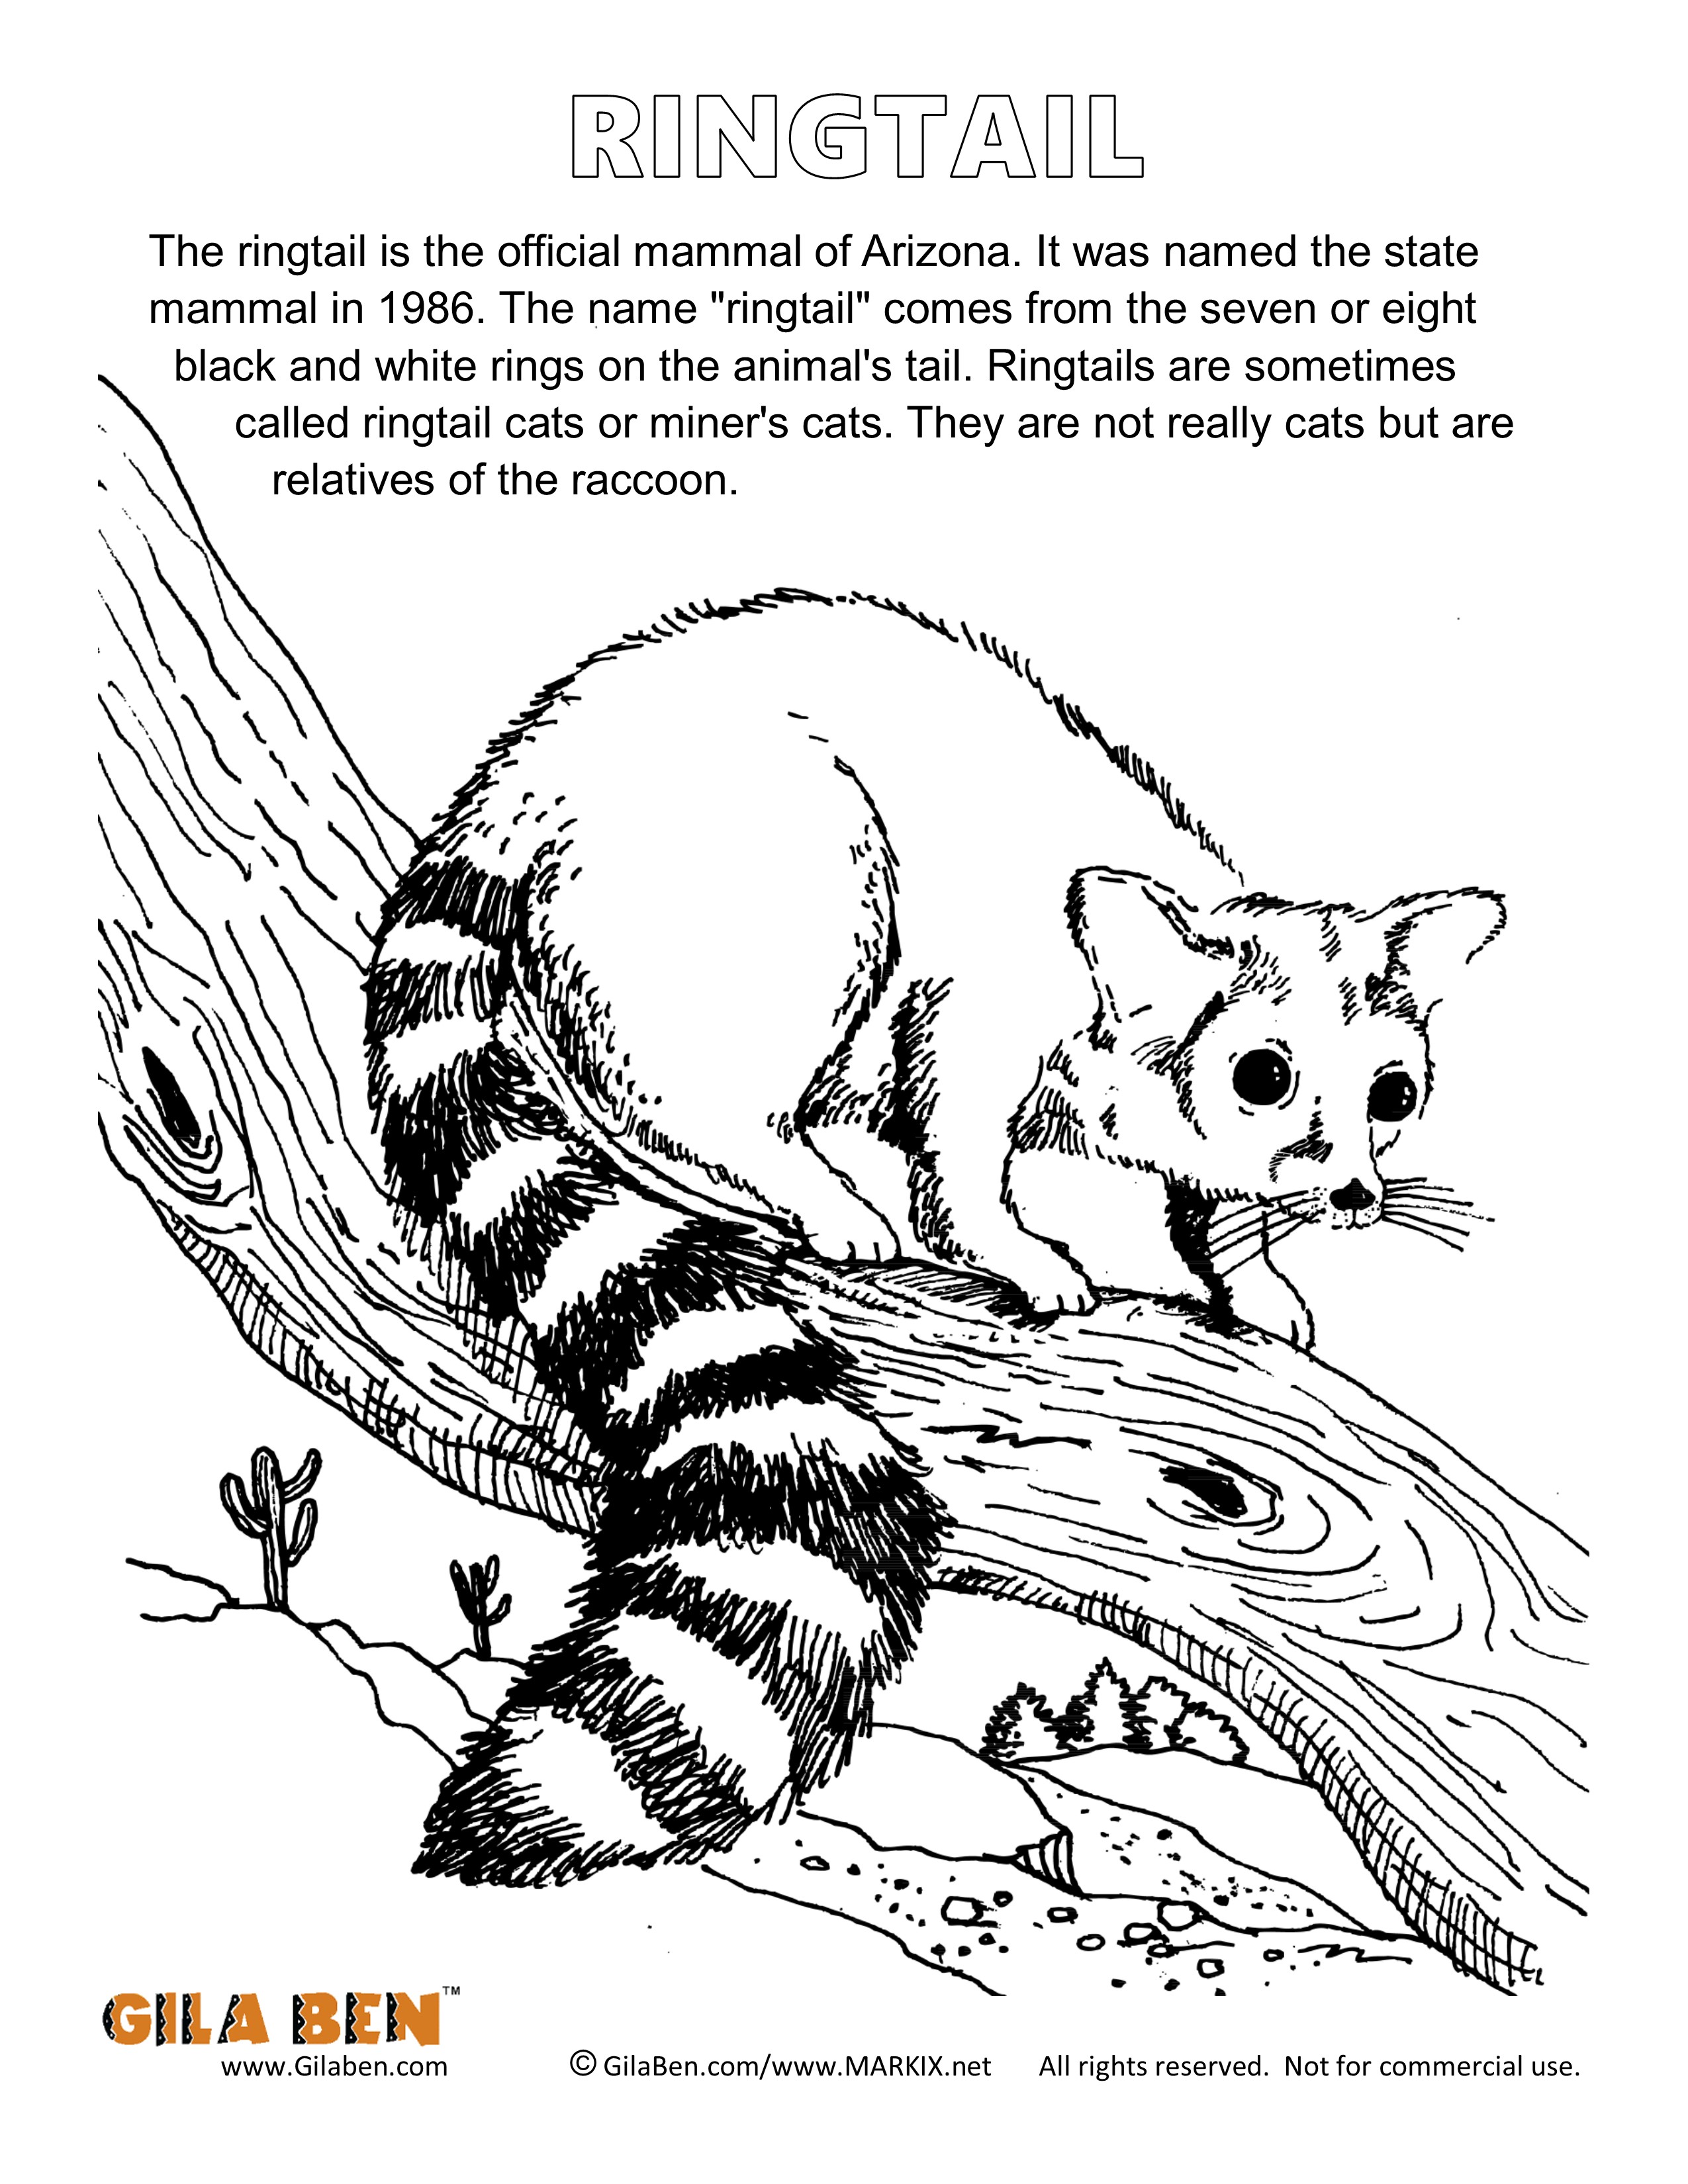 Ringtail, Arizona's Official State Mammal, ringtail cat